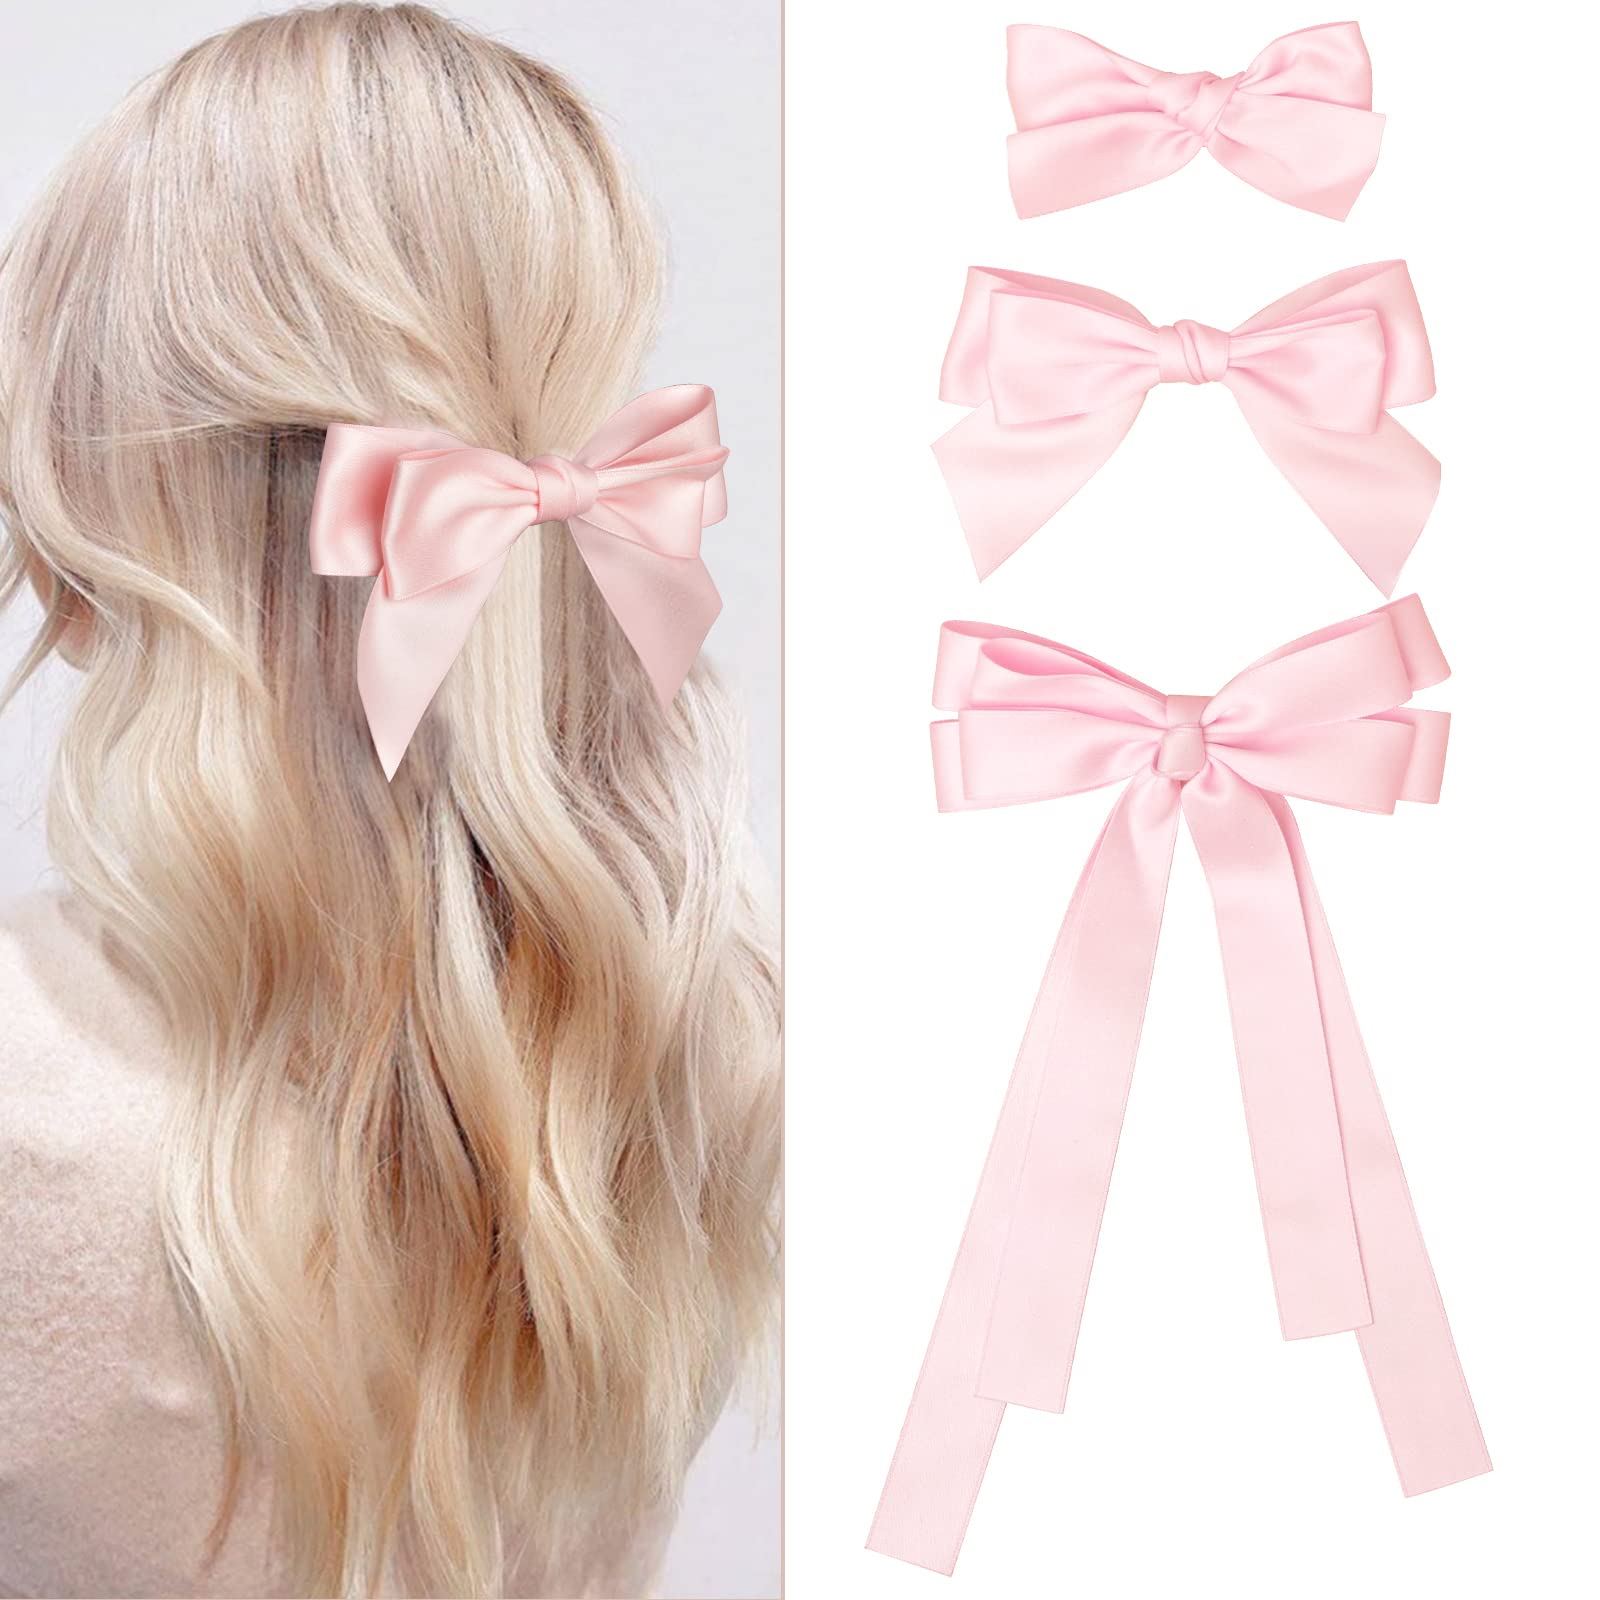 M T BROTHERS - 1 PIECE Big Satin Layered Hair Bows for Women Girls 11 Inch  Barrette Hair Clip Long Black Ribbon Bows French Style Hair Accessories (11  IN, WHITE) : Amazon.in: Beauty